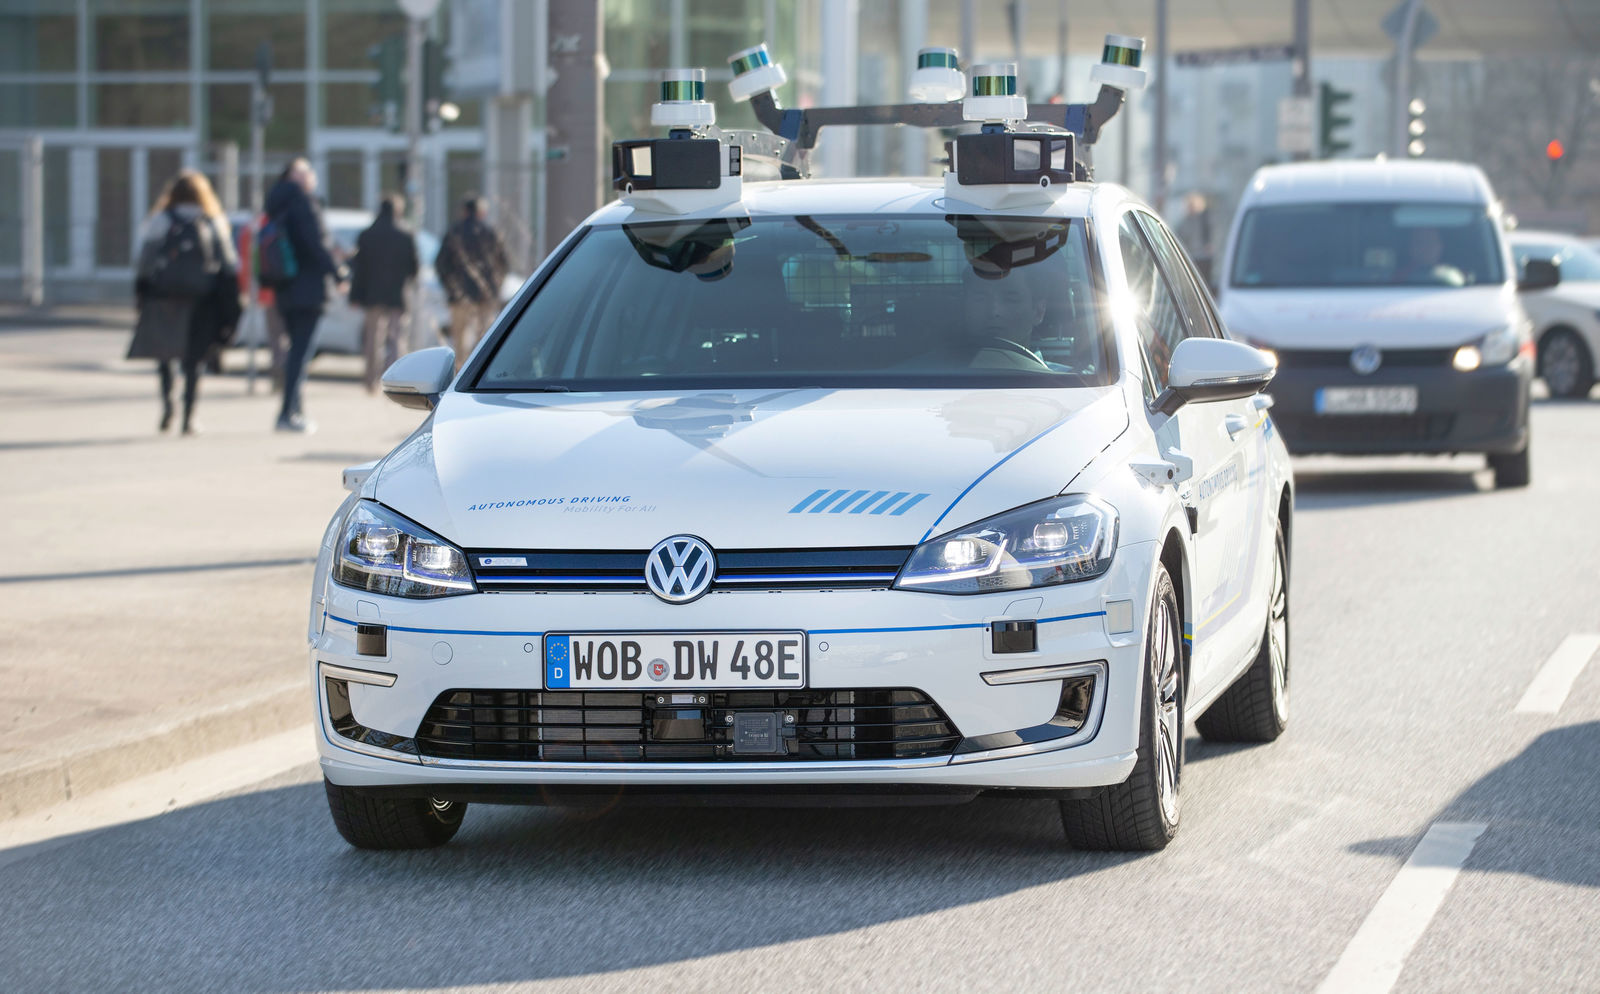 Volkswagen tests highly-automated driving in Hamburg